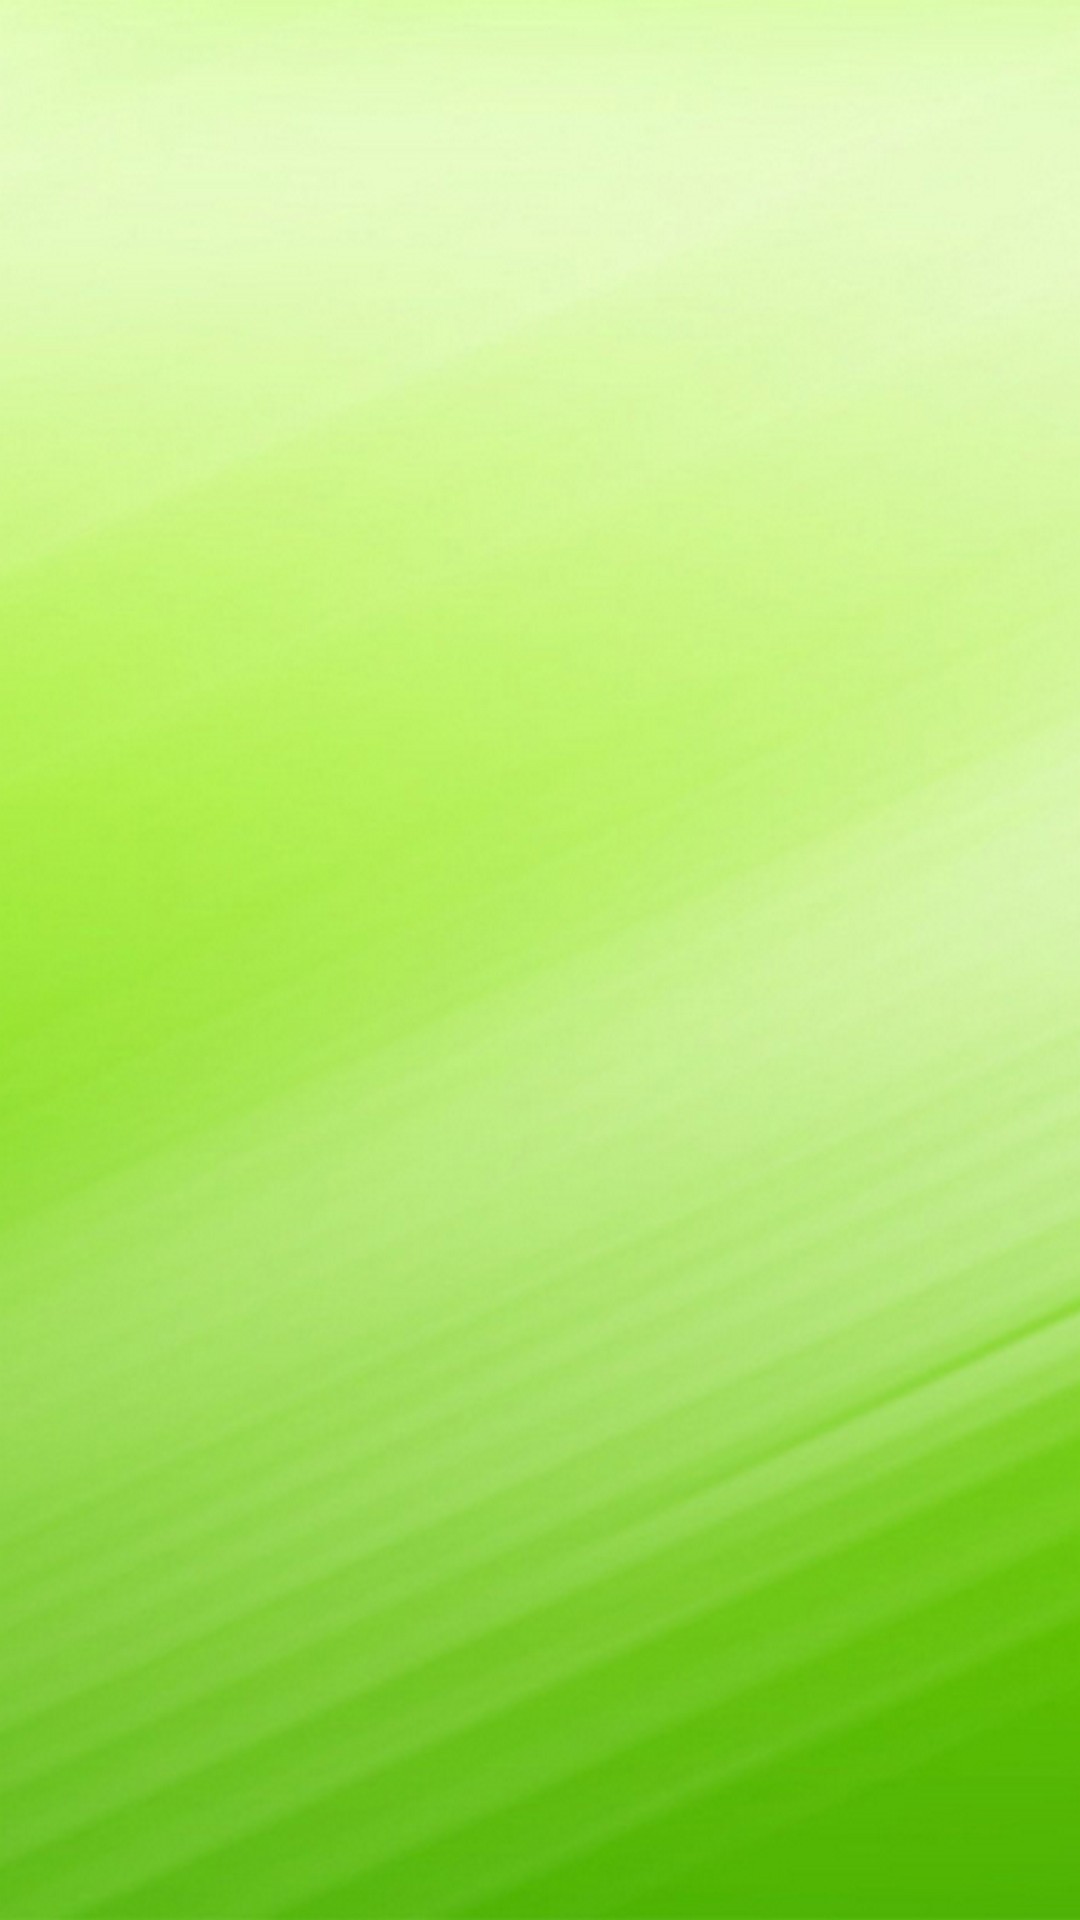 Mobile Wallpapers Light Green with image resolution 1080x1920 pixel. You can make this wallpaper for your iPhone 5, 6, 7, 8, X backgrounds, Mobile Screensaver, or iPad Lock Screen